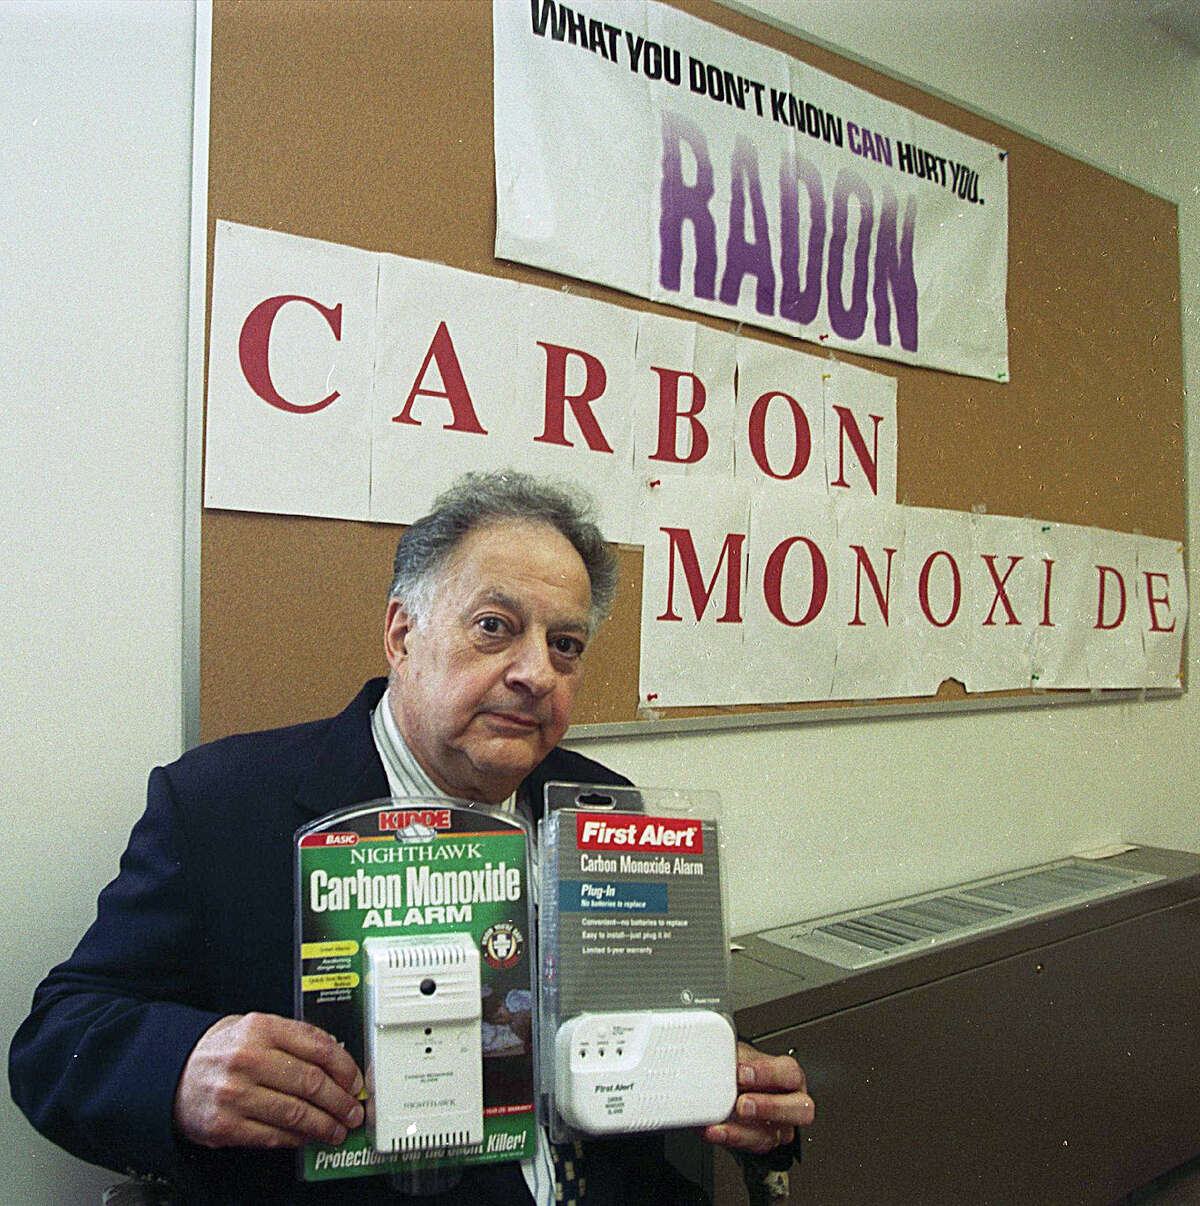 Thomas Armentano, Cromwell's Public Health Coordinator, holds two alarm-type CO2-detectors that can be purchased for the home........photo by Irena Pastorello......100100.irenaphoto